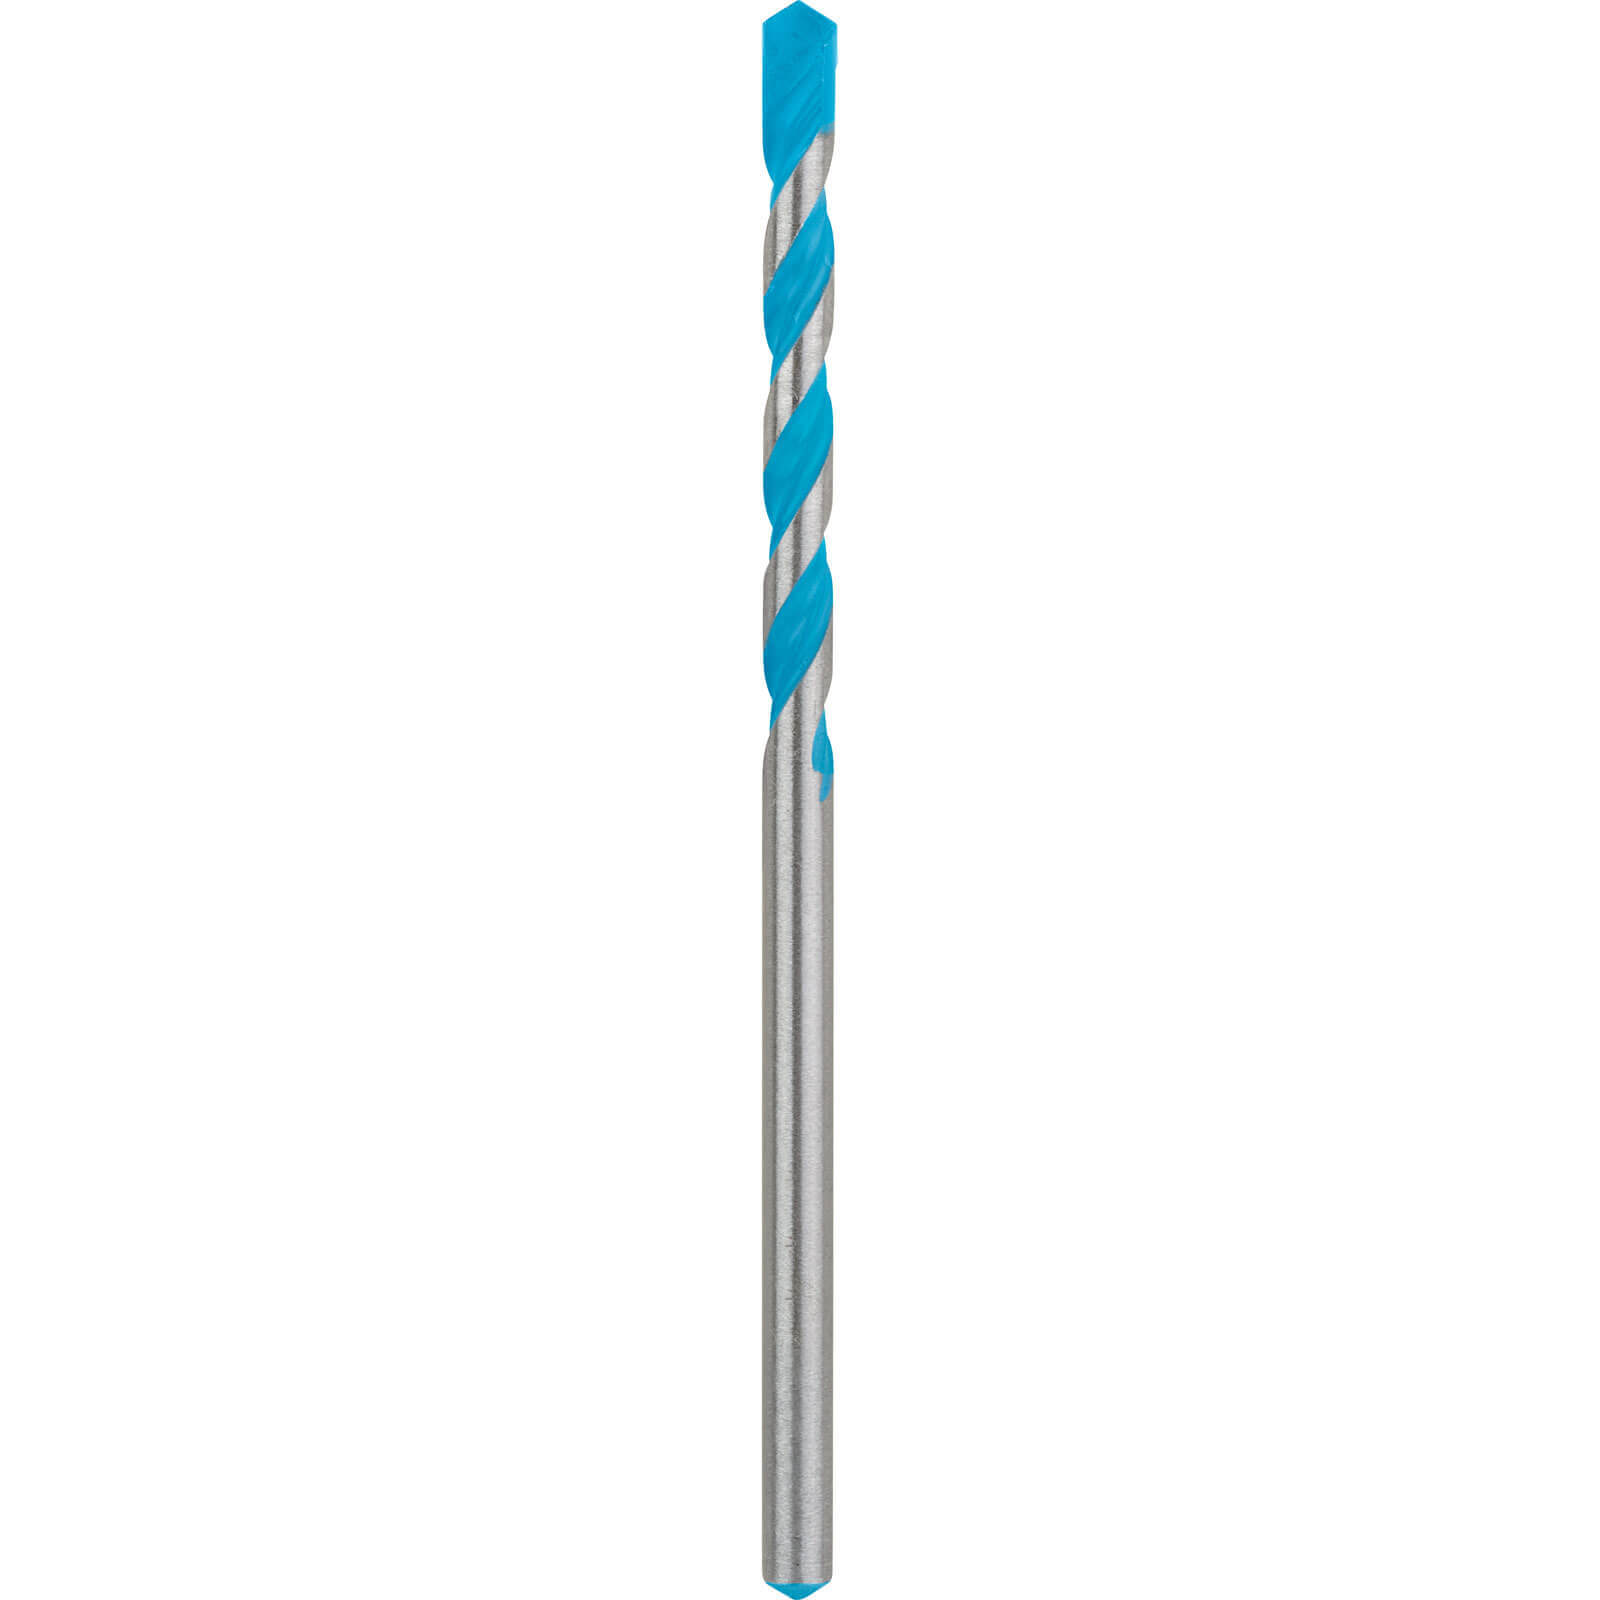 Image of Bosch Expert CYL-9 Multi Construction Drill Bit 3.5mm 70mm Pack of 1